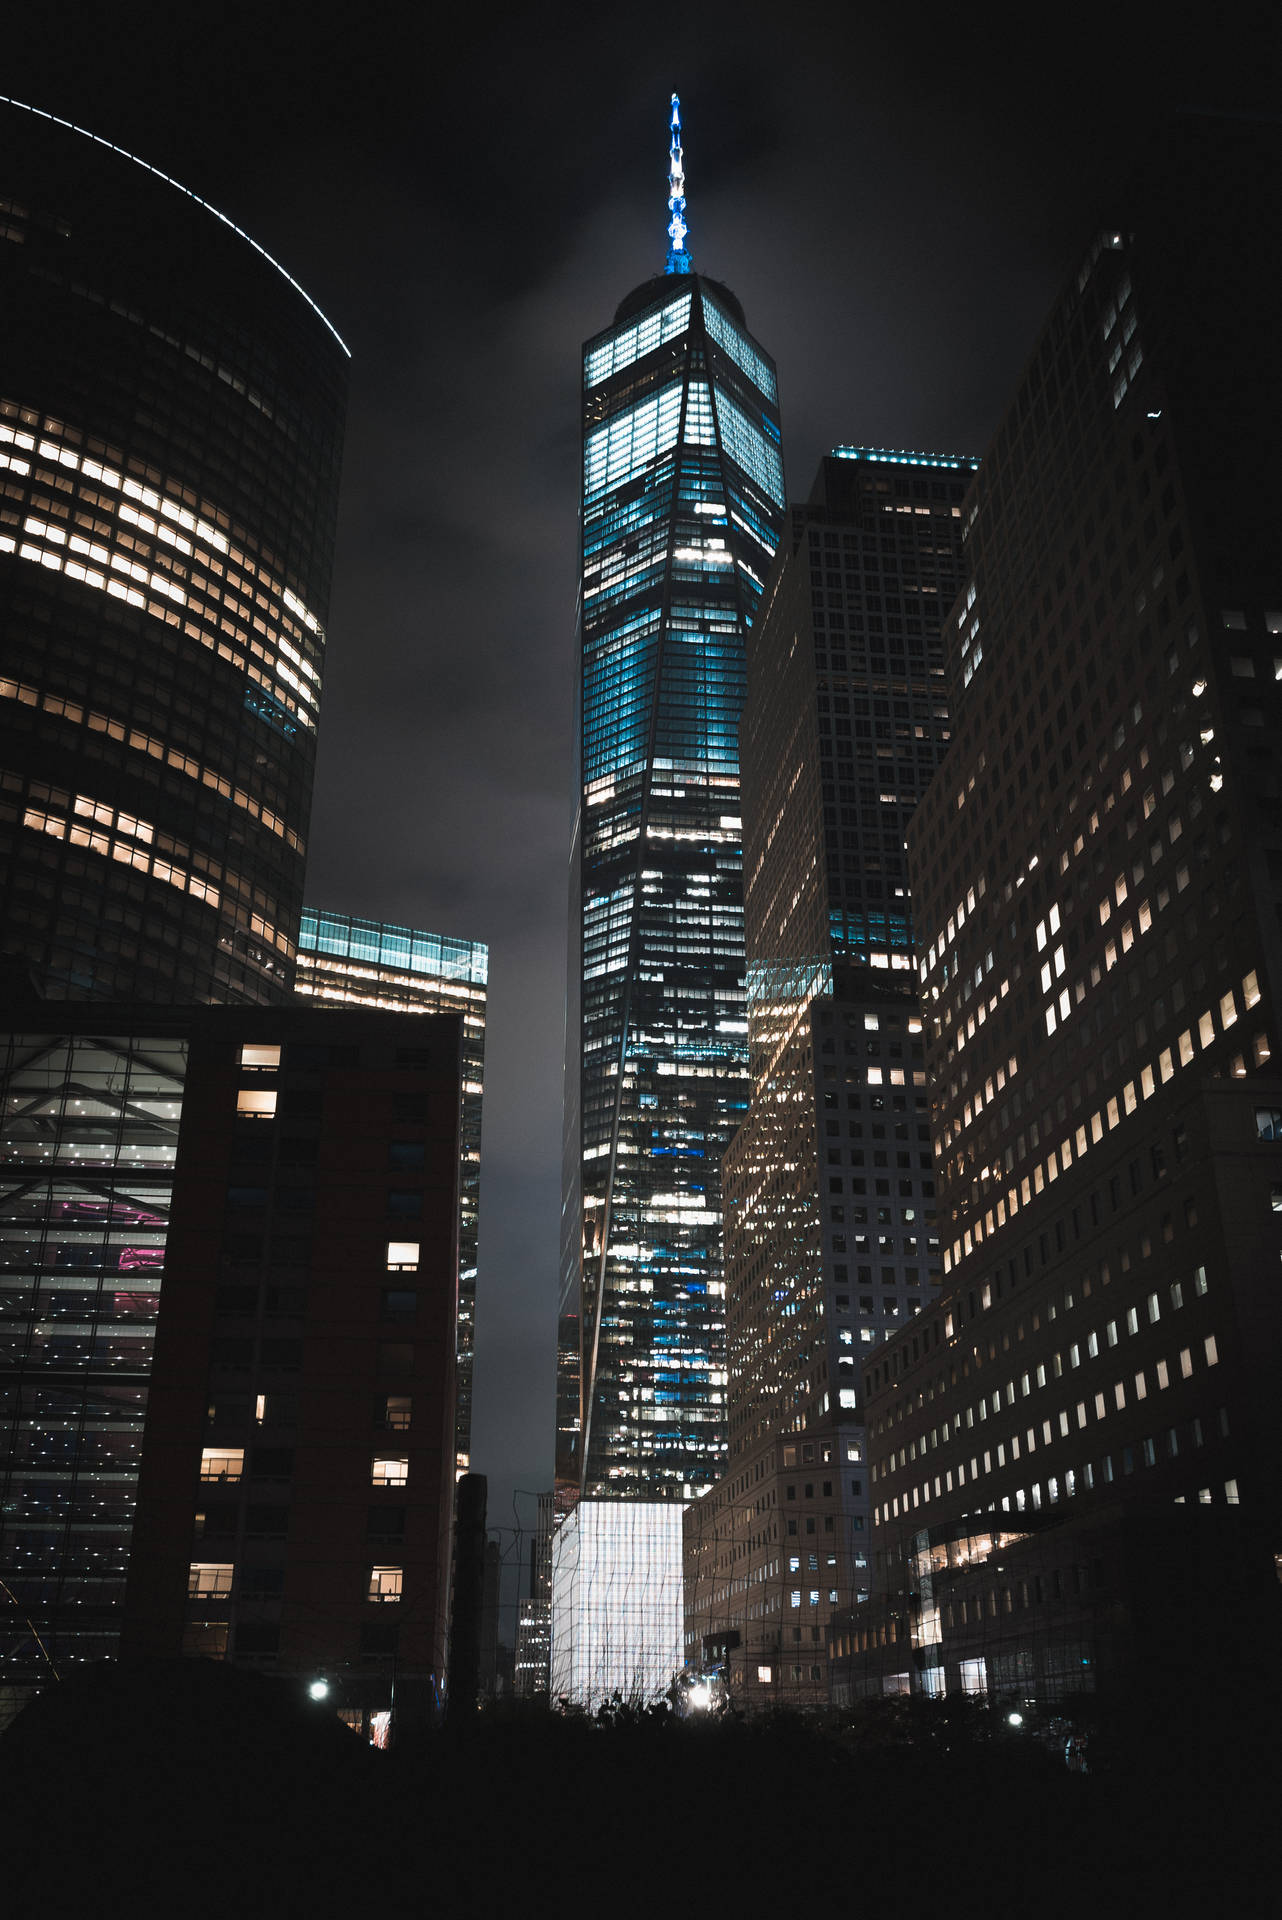 Download Trade Center New York City Night View Wallpaper | Wallpapers.com